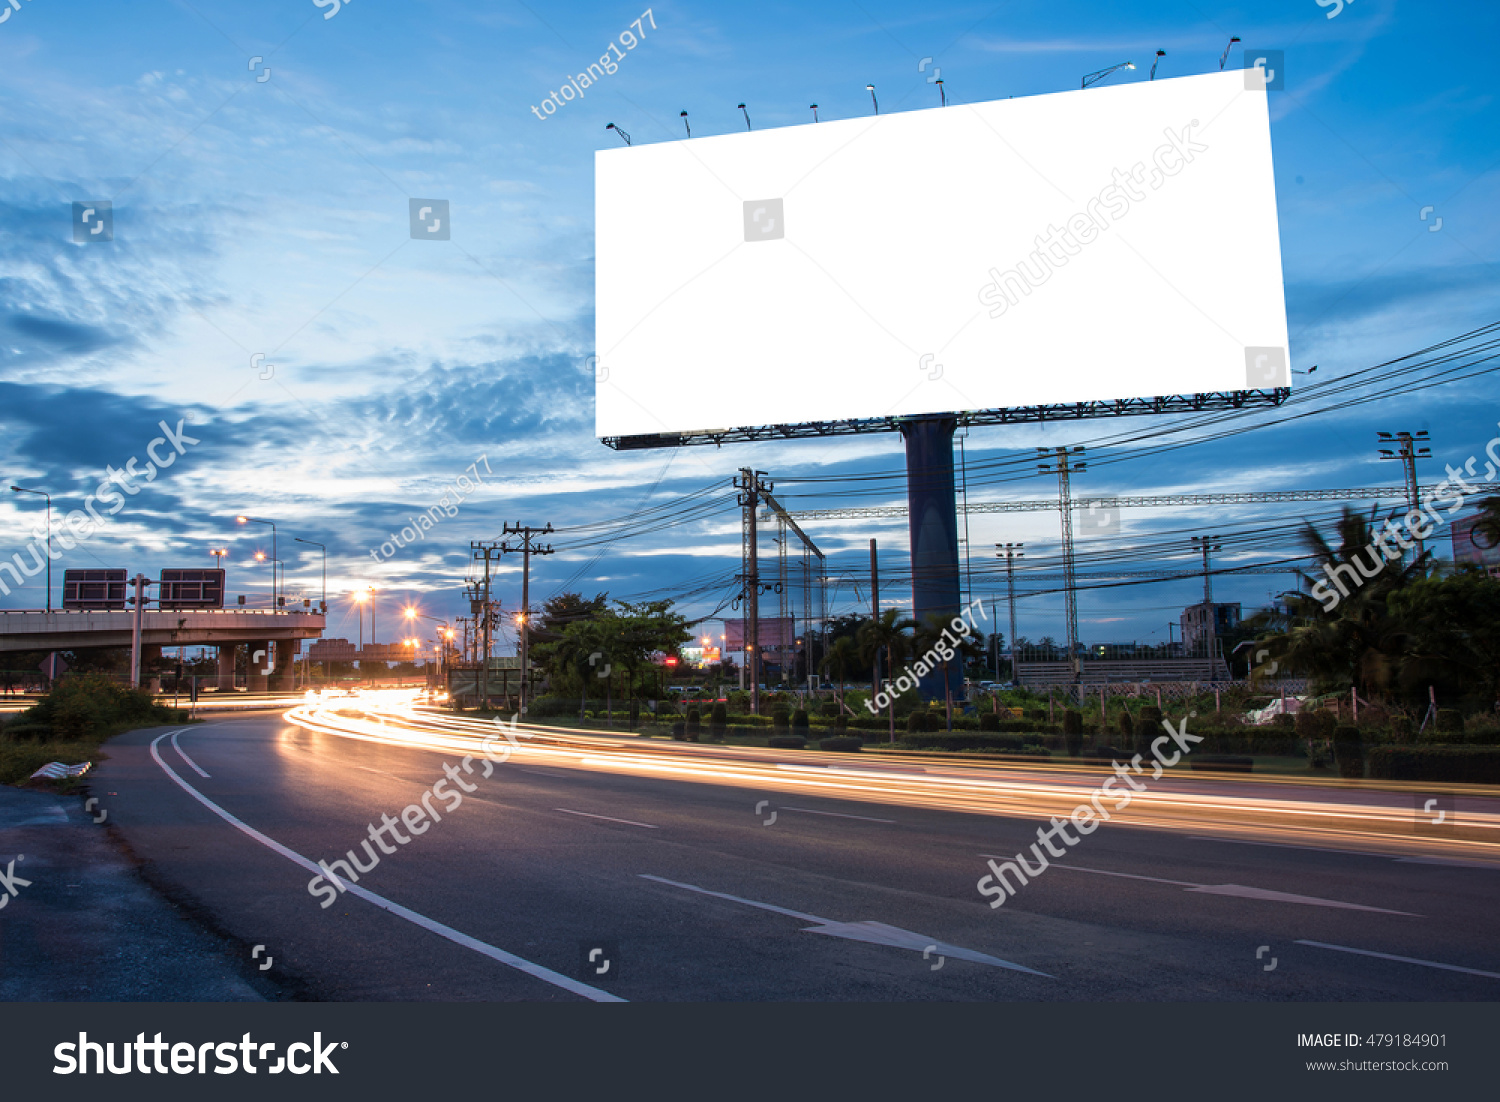 Blank billboard for advertisement at twilight time with light trails on the road at dusk, business advertising concept. #479184901